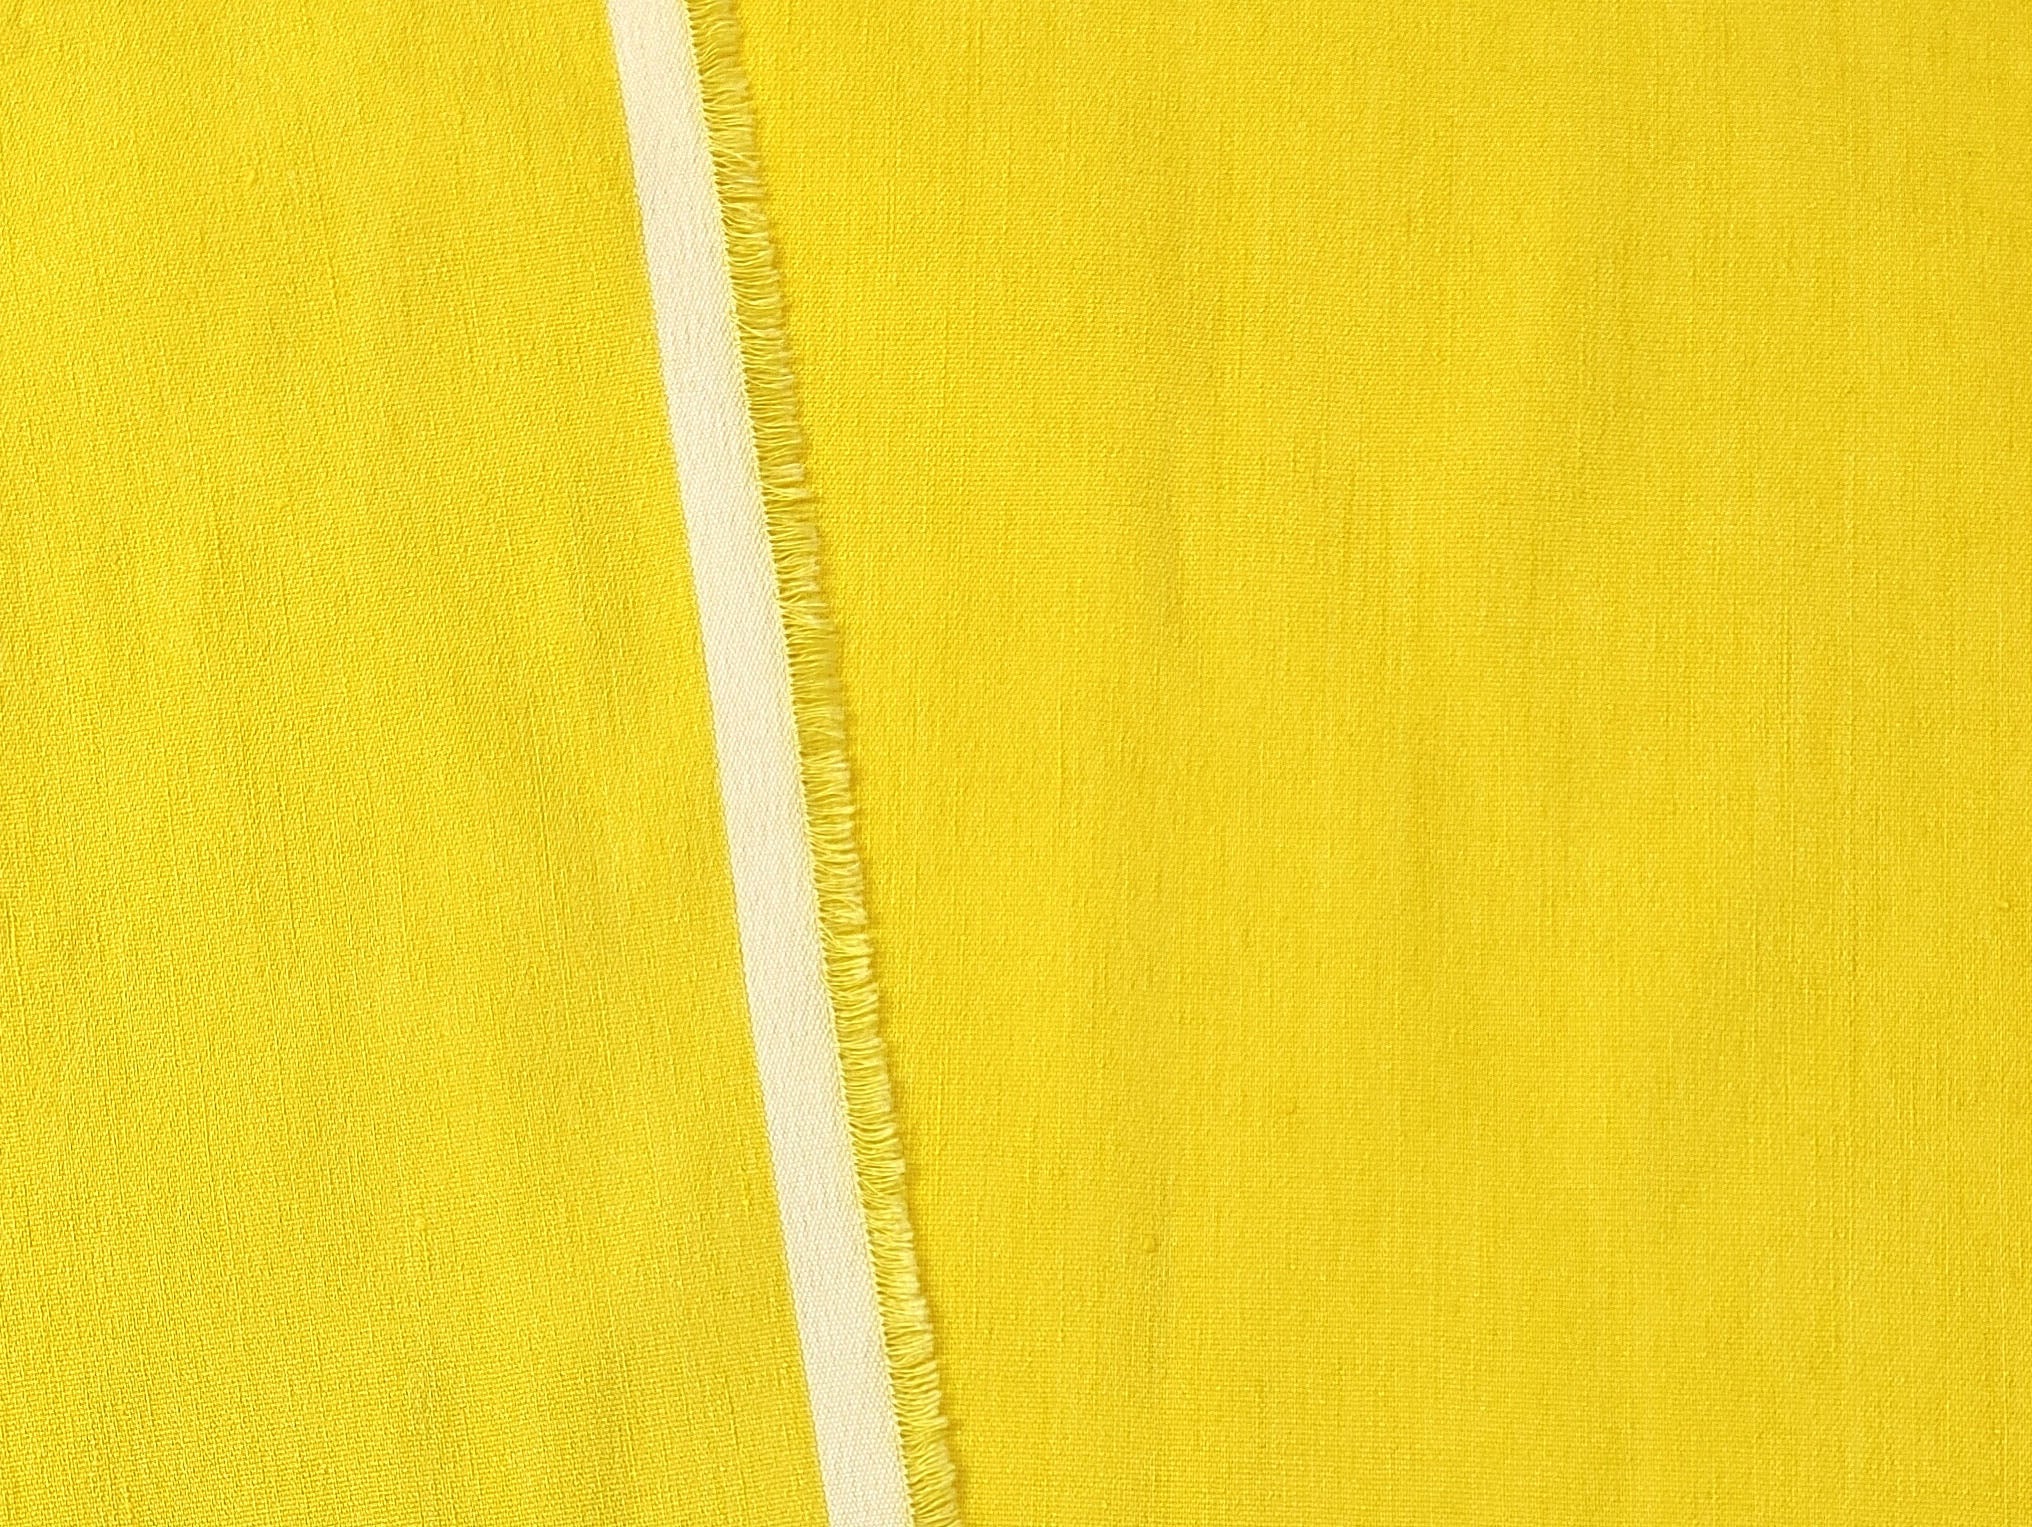 Donna Linen - High Density Linen Rayon Stretch Fabric 4025 4024 5982 4803 4579 4578 4023 3978 - The Linen Lab - Yellow